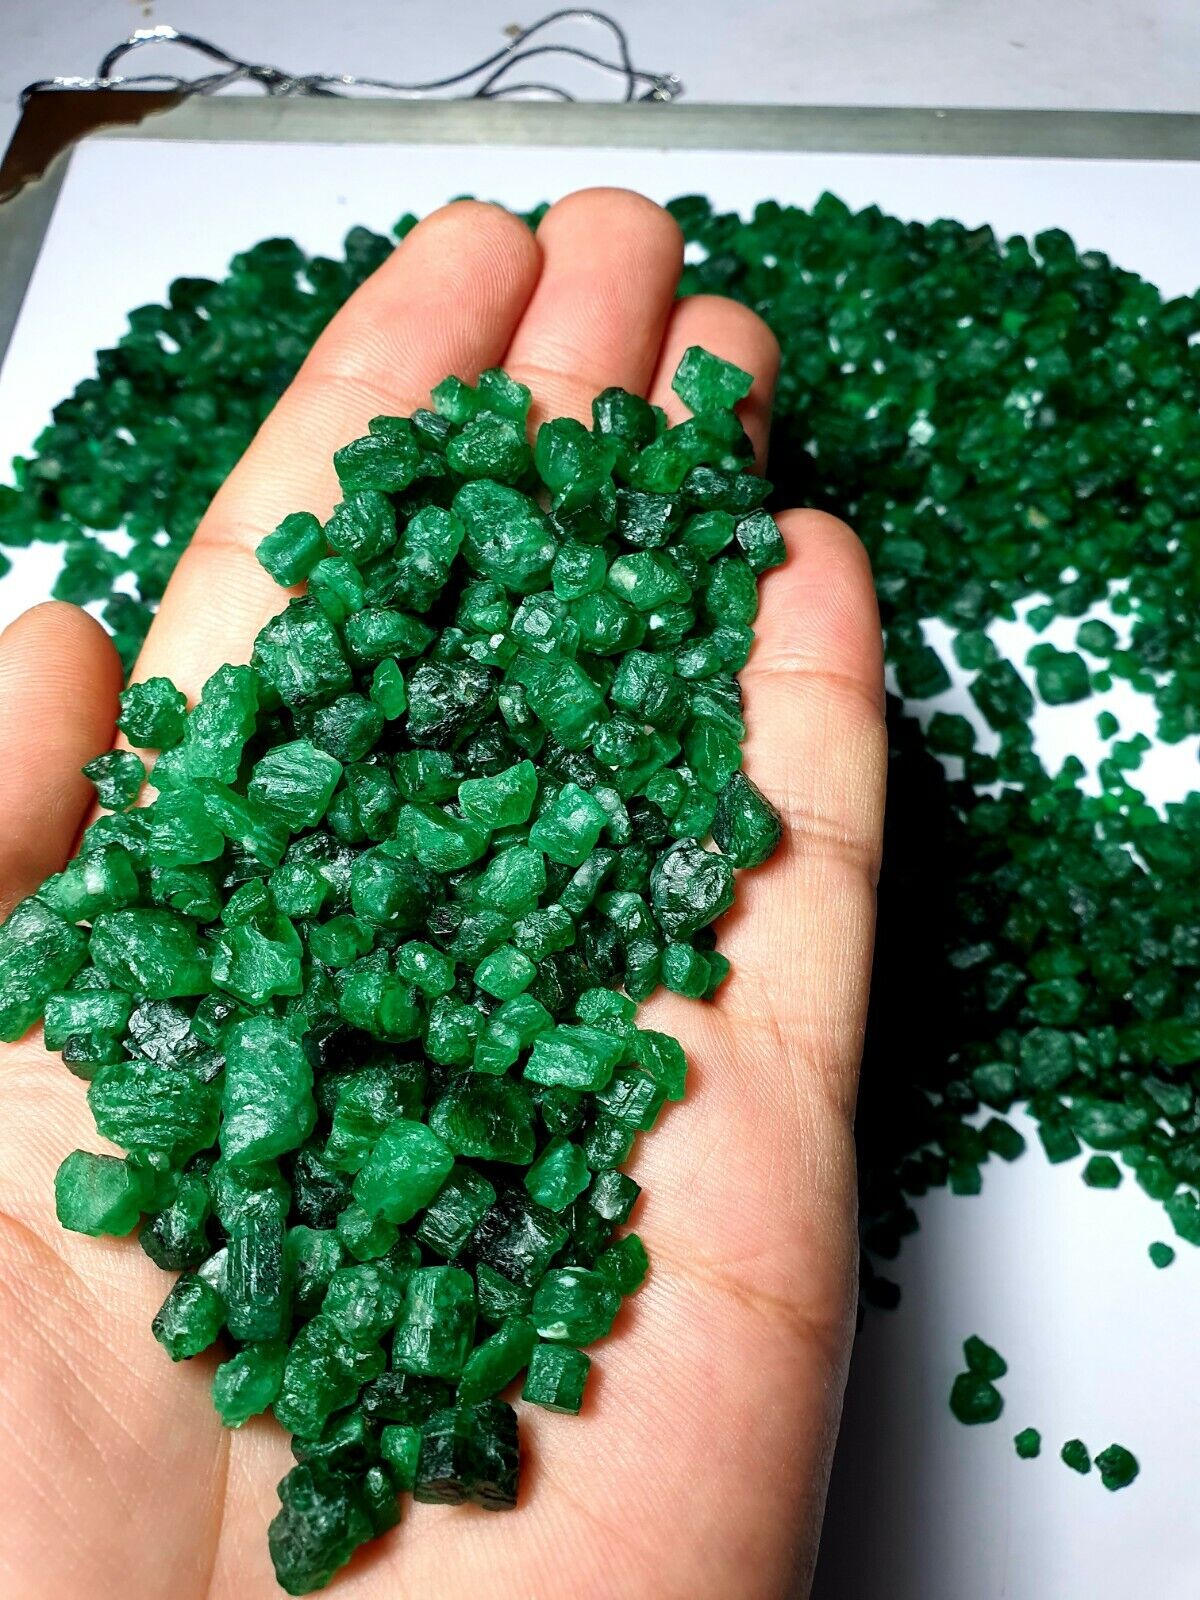 2000CT Top Vivad Color Emerald Crystals Type Rough Lot From Swat Mine Pakistan 